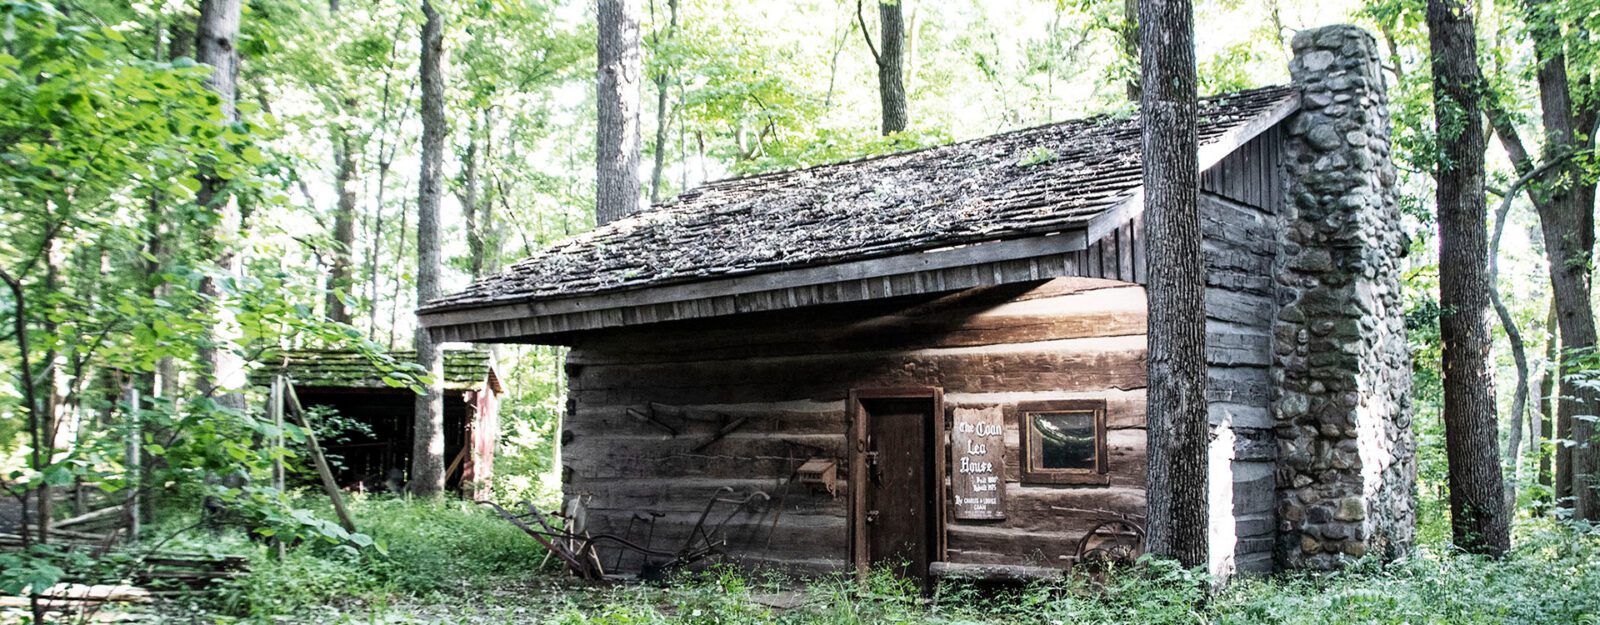 historical cabin in the woods